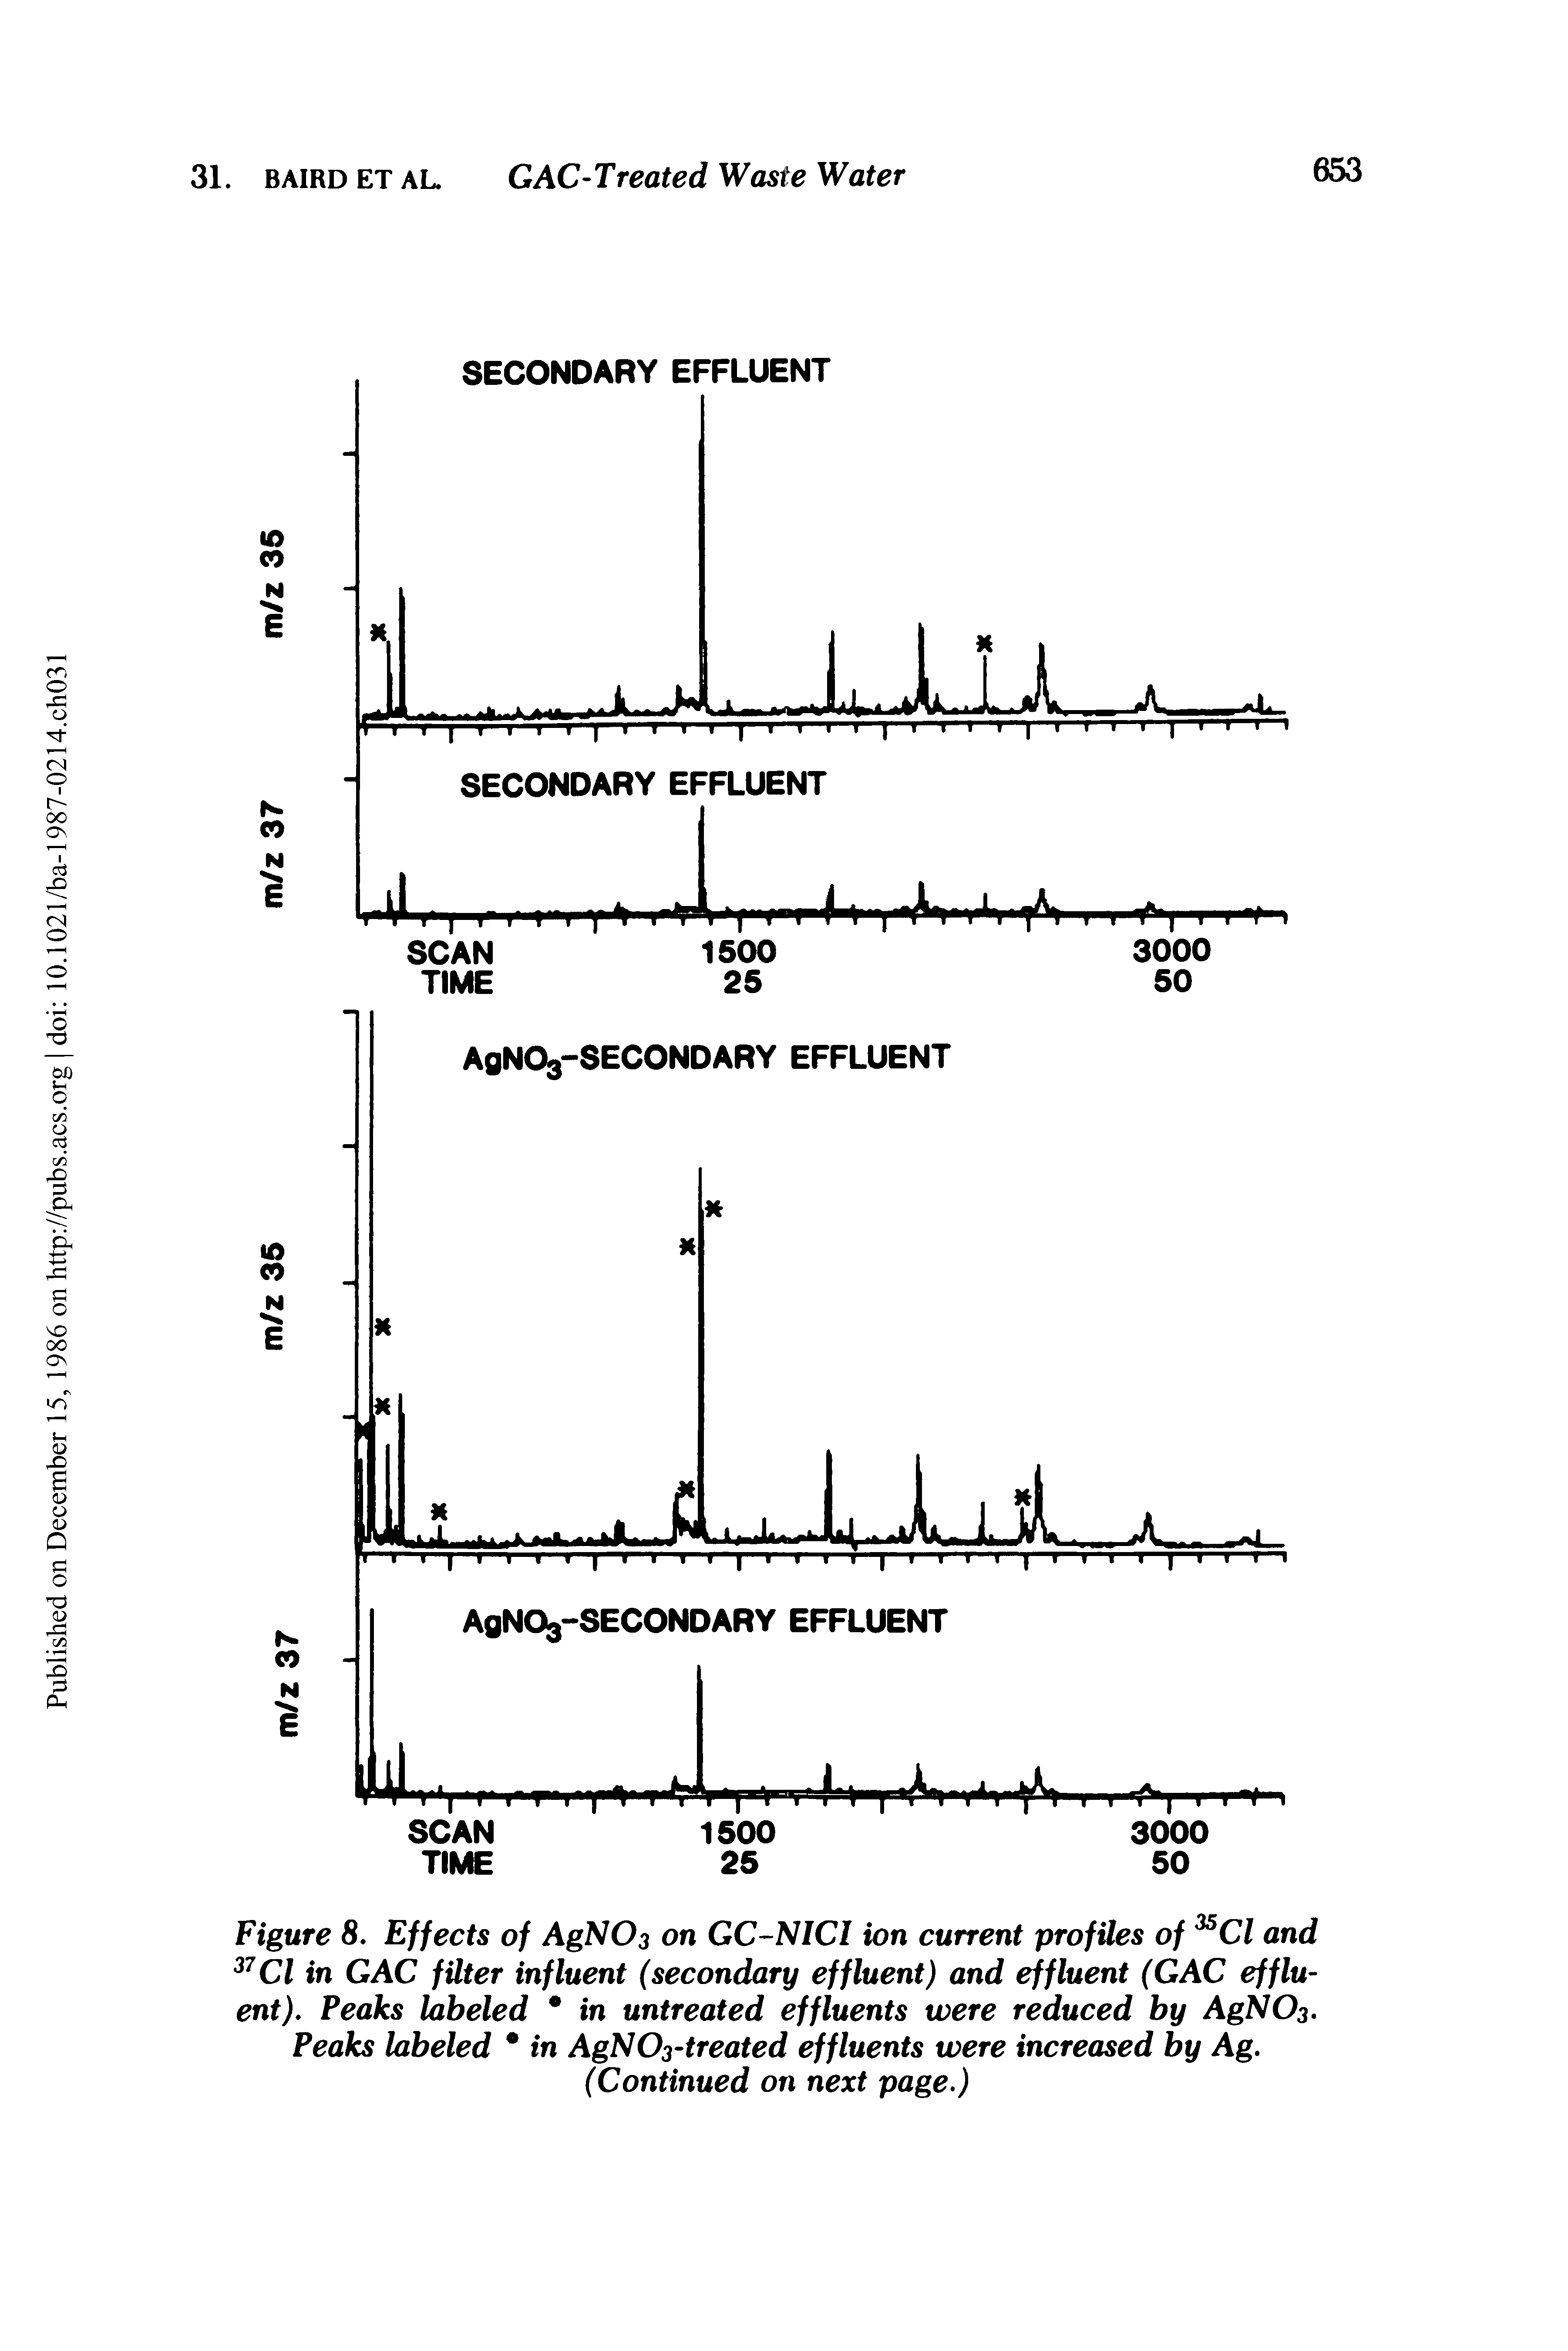 Figure 8. Effects of AgNC>3 on GC-NICl ion current profiles of 35Cl and 37 Cl in GAC filter influent (secondary effluent) and effluent (GAC effluent). Peaks labeled in untreated effluents were reduced by AgNC>3. Peaks labeled m in AgNC>3-treated effluents were increased by Ag. (Continued on next page.)...